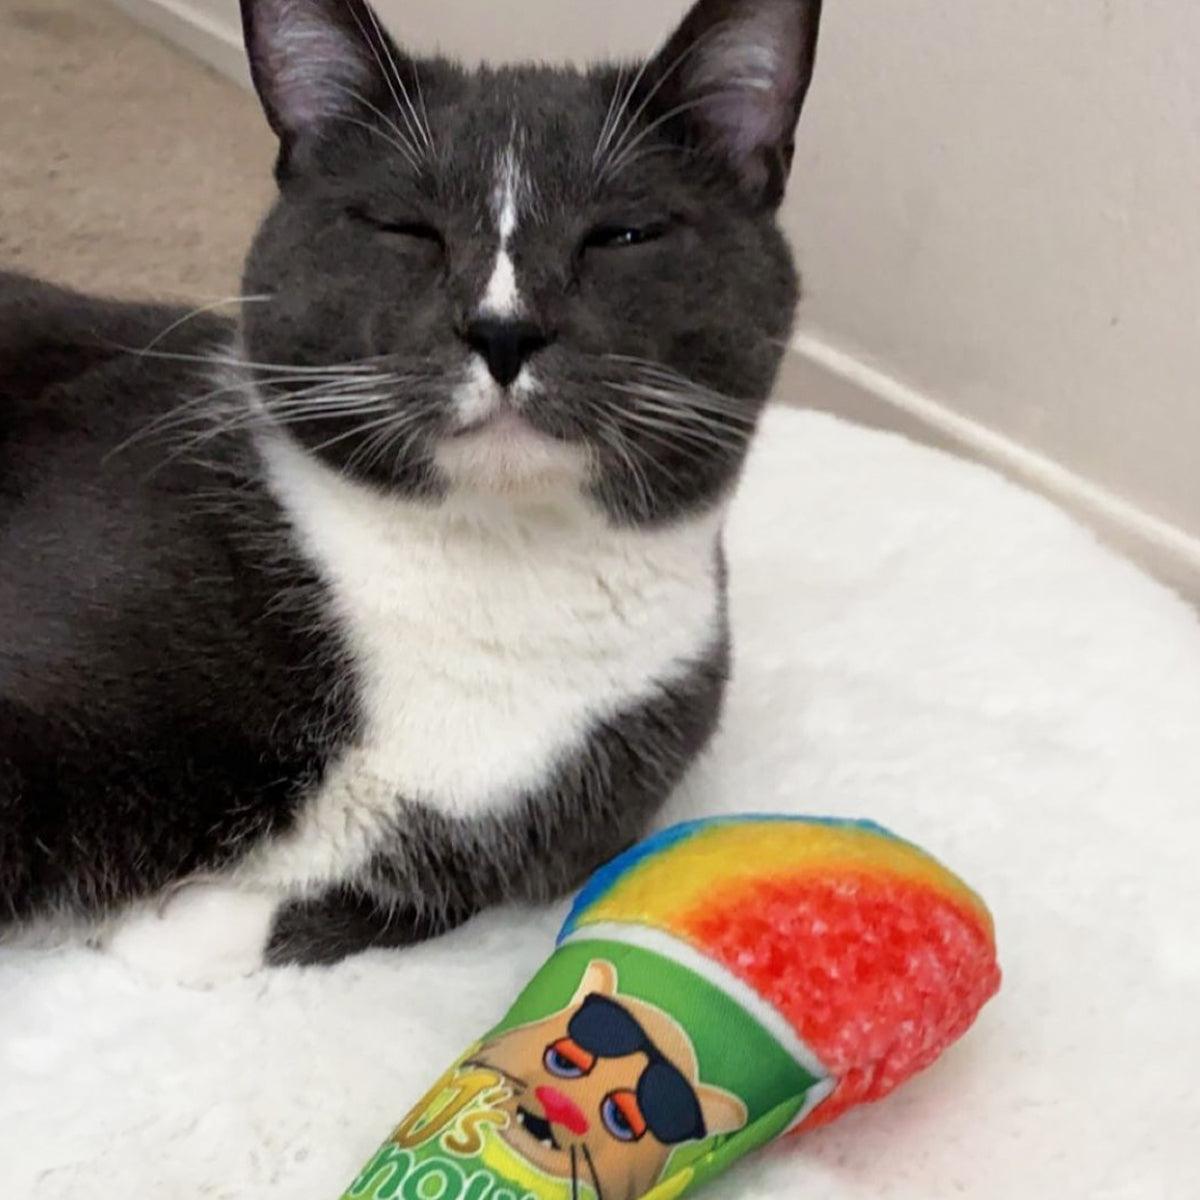 Get Chilled Refillable Snow Cone - Meowijuana - A Catnip Company